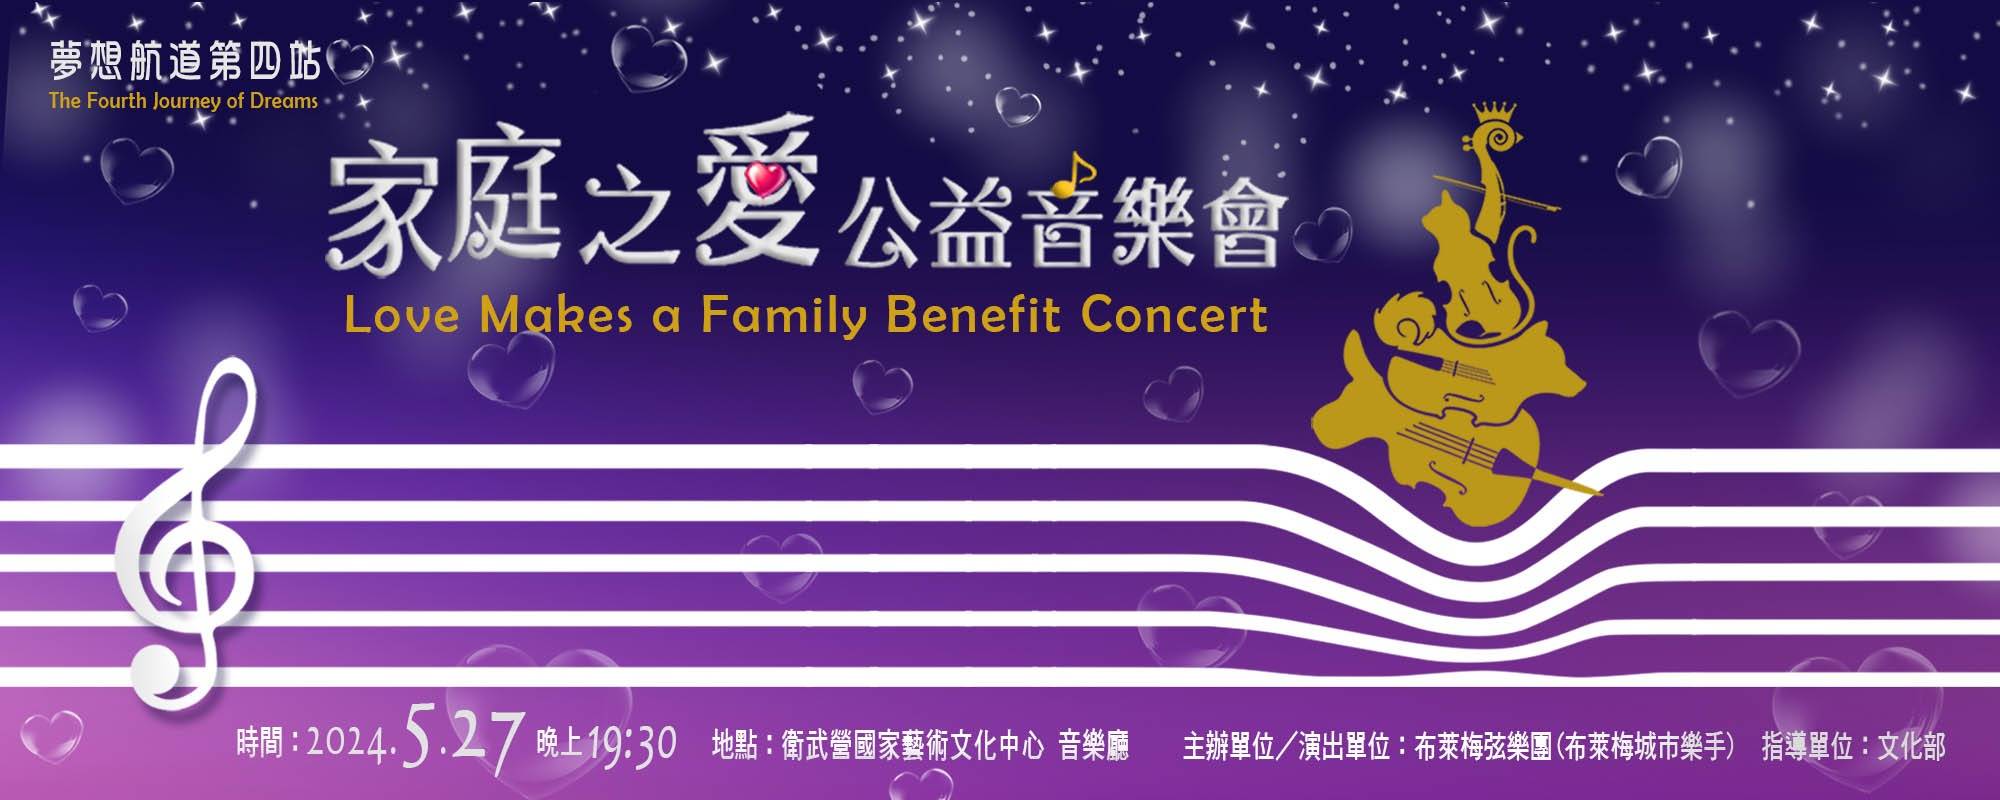 Love Makes a Family-Benefit Concert